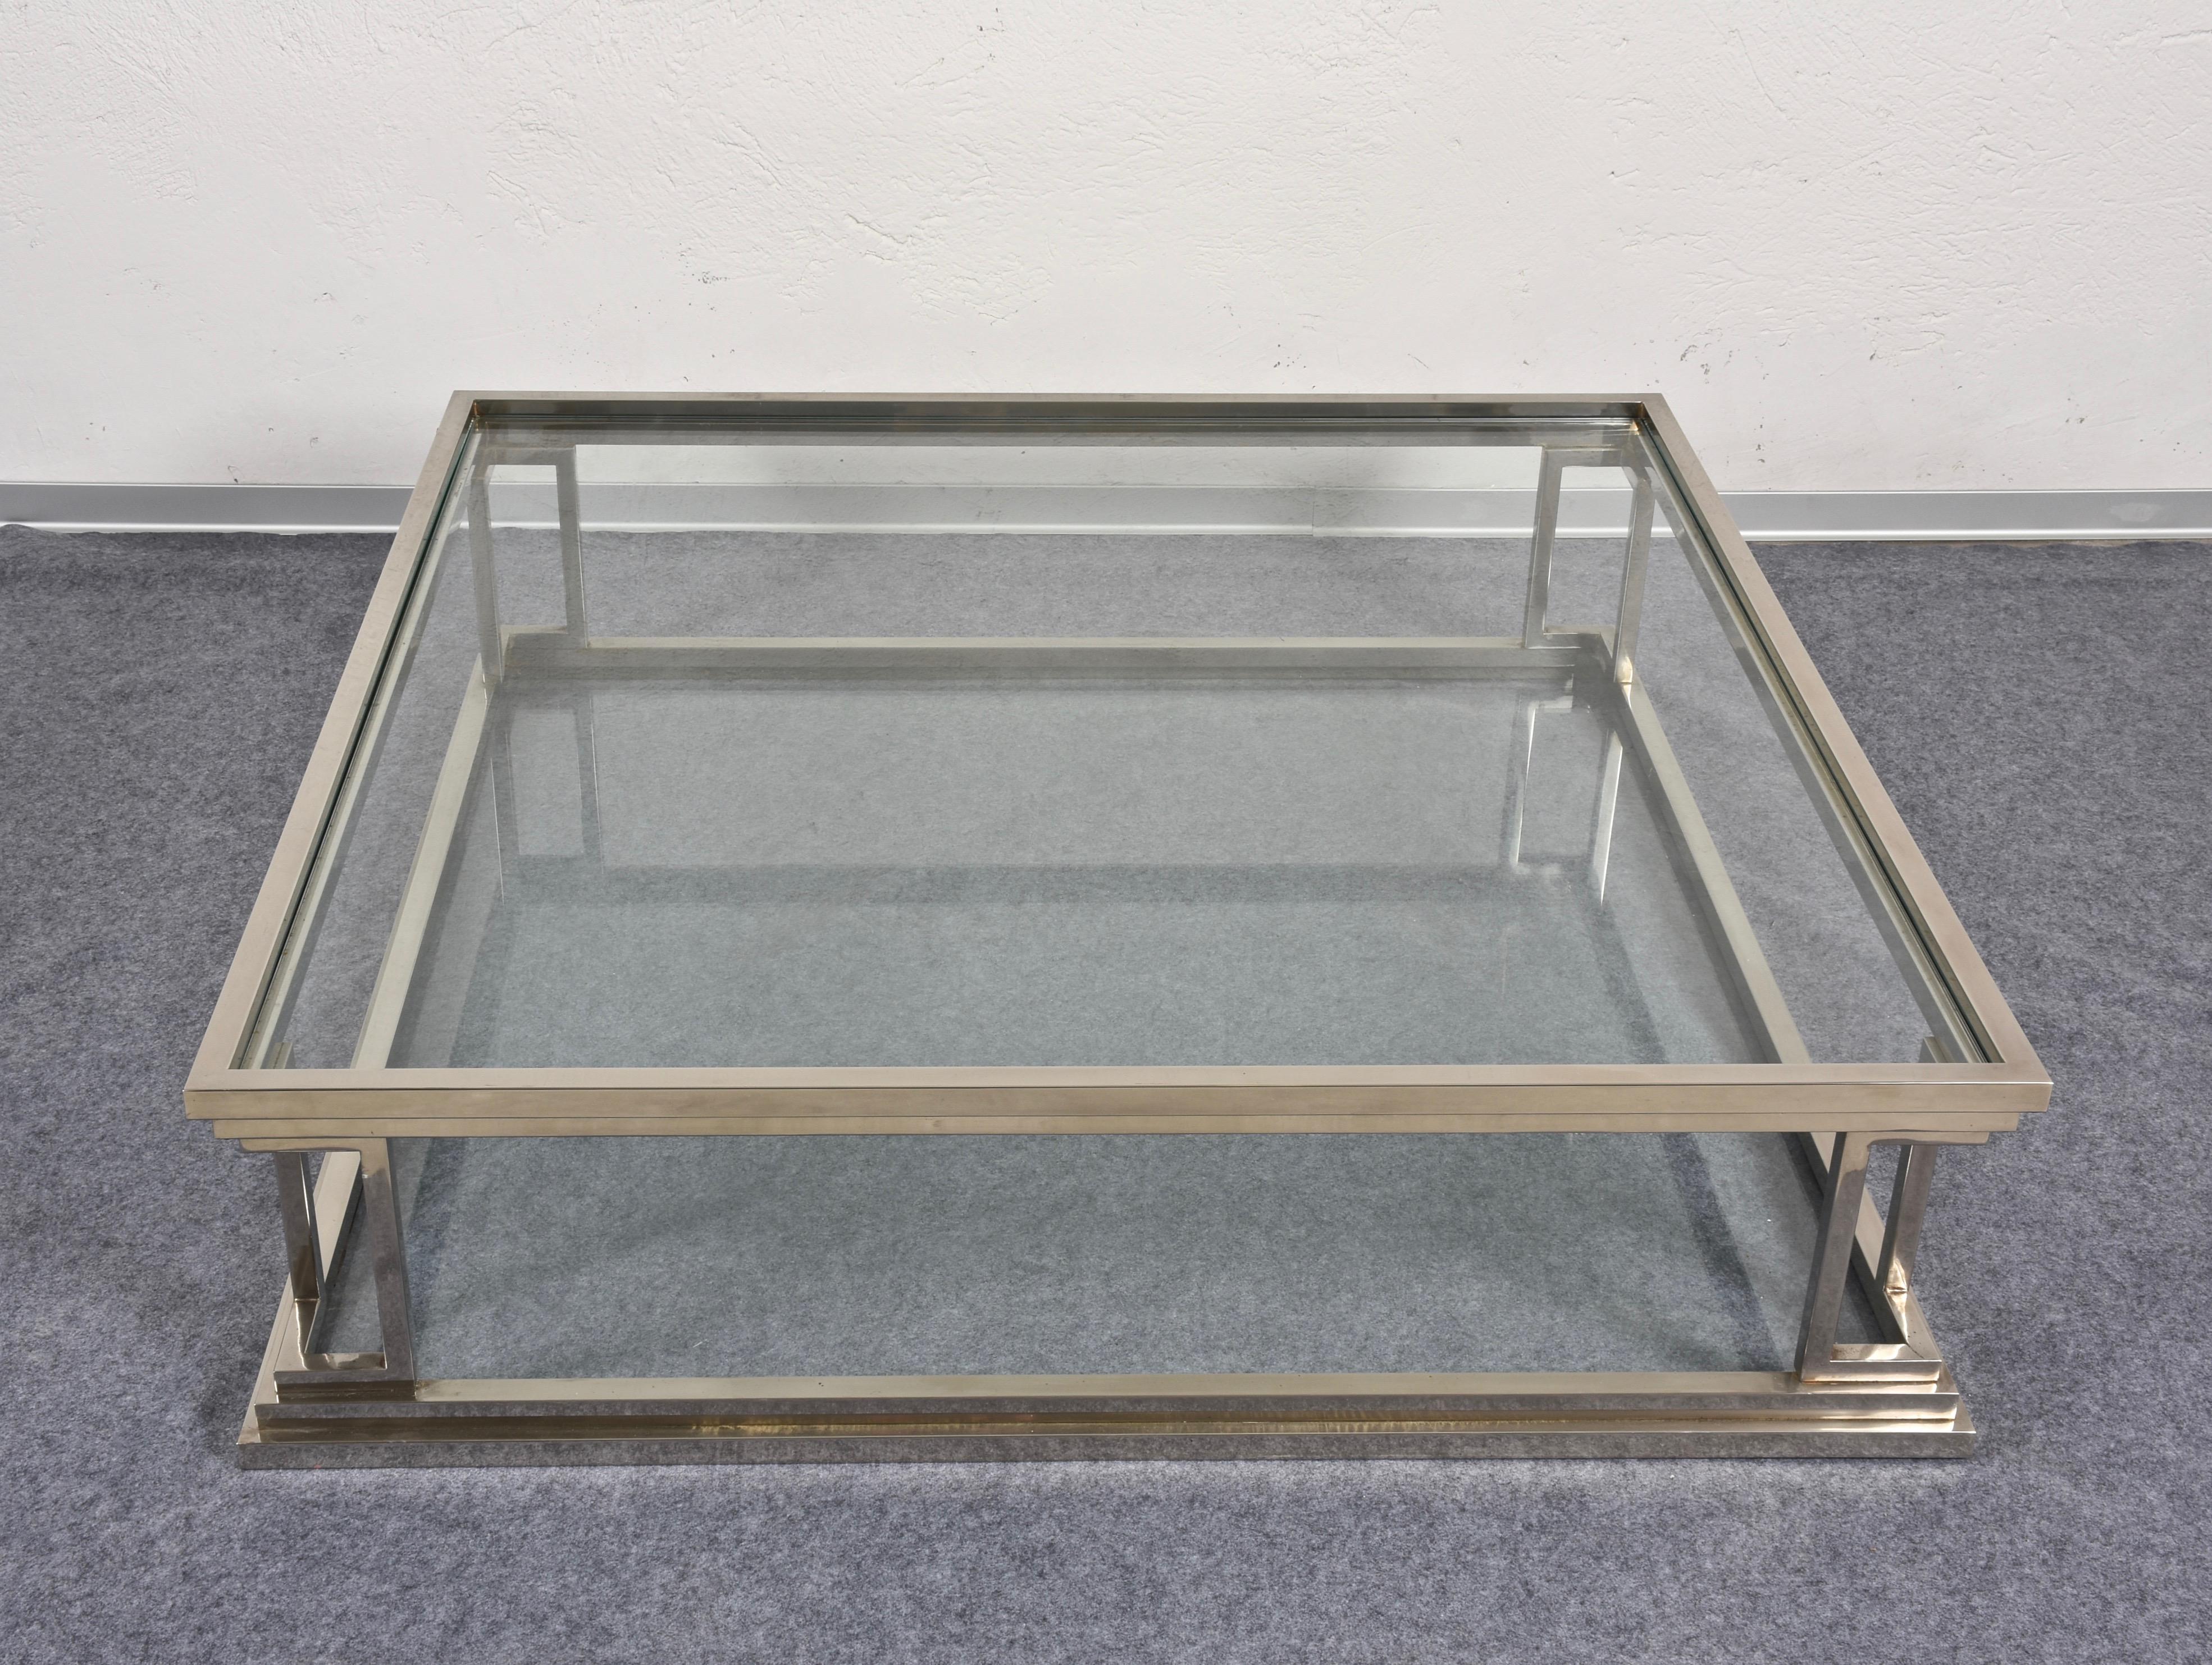 Italian Square Stainless Steel Coffee Table with 2 Levels in Glass, Rega, Italy 1970s